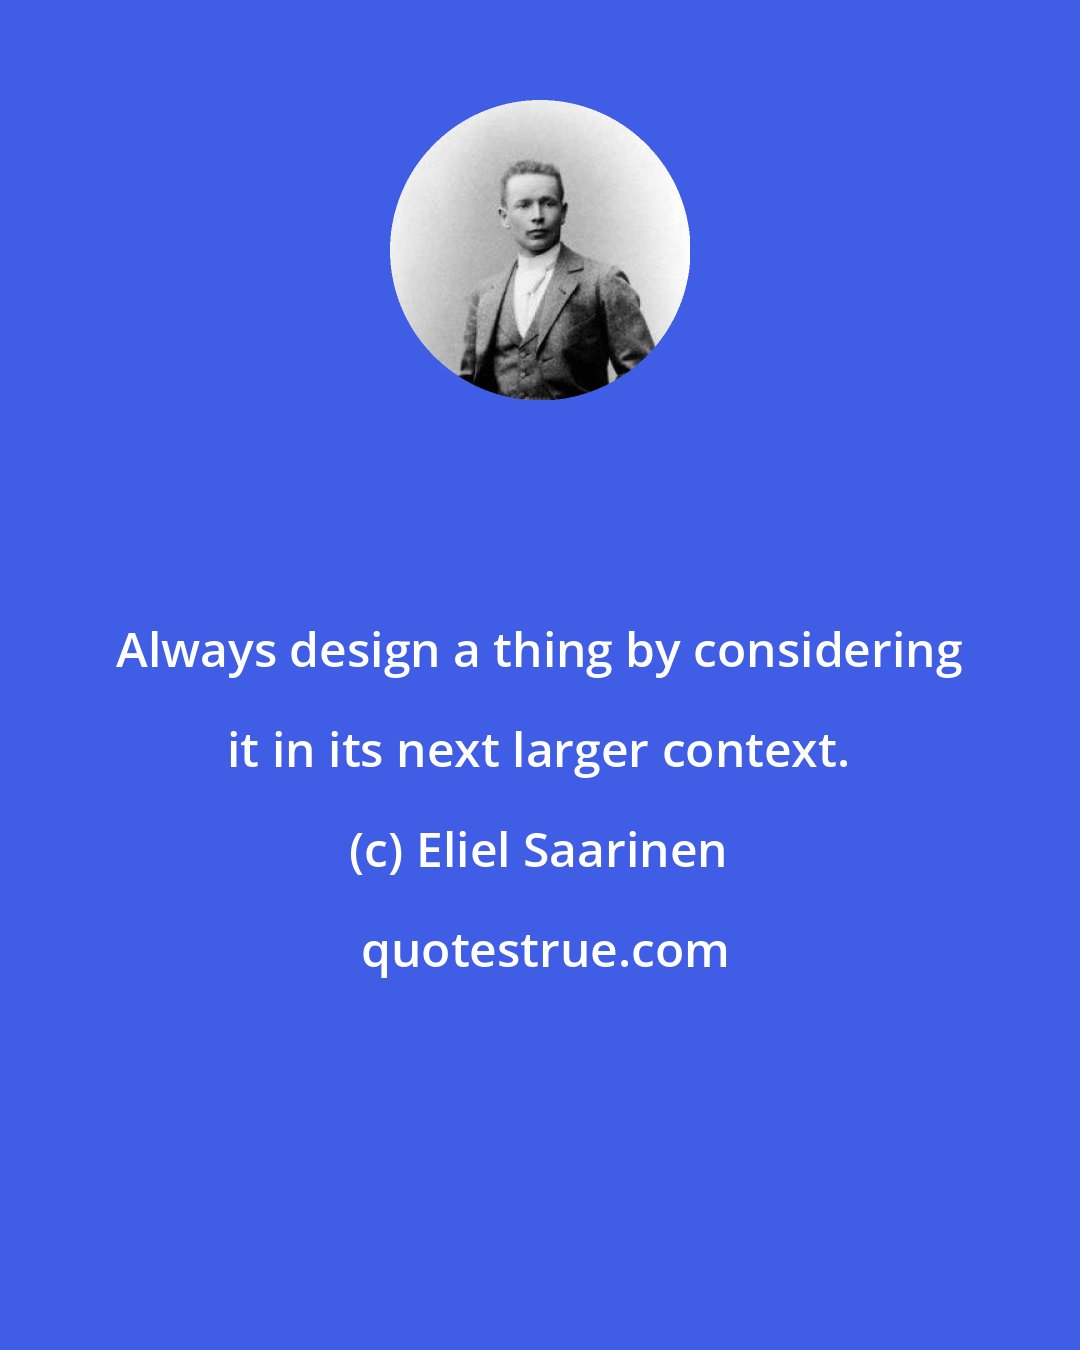 Eliel Saarinen: Always design a thing by considering it in its next larger context.